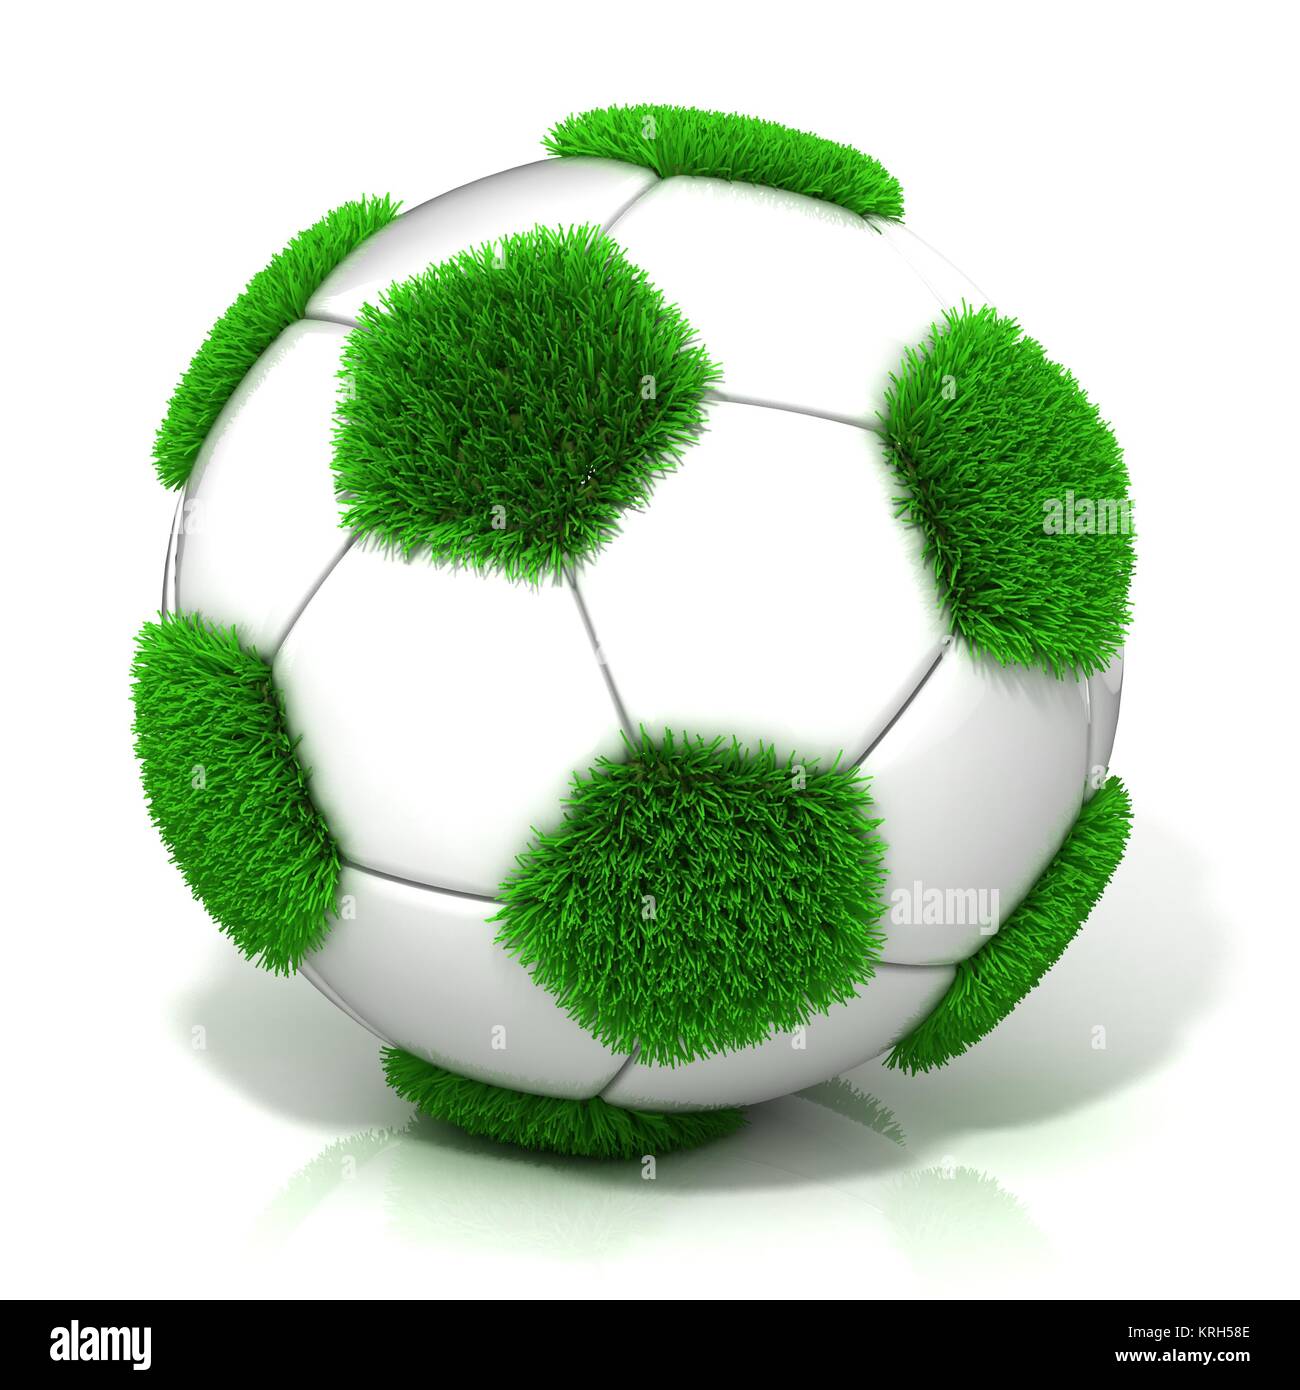 Football ball with grassy field instead black Stock Photo